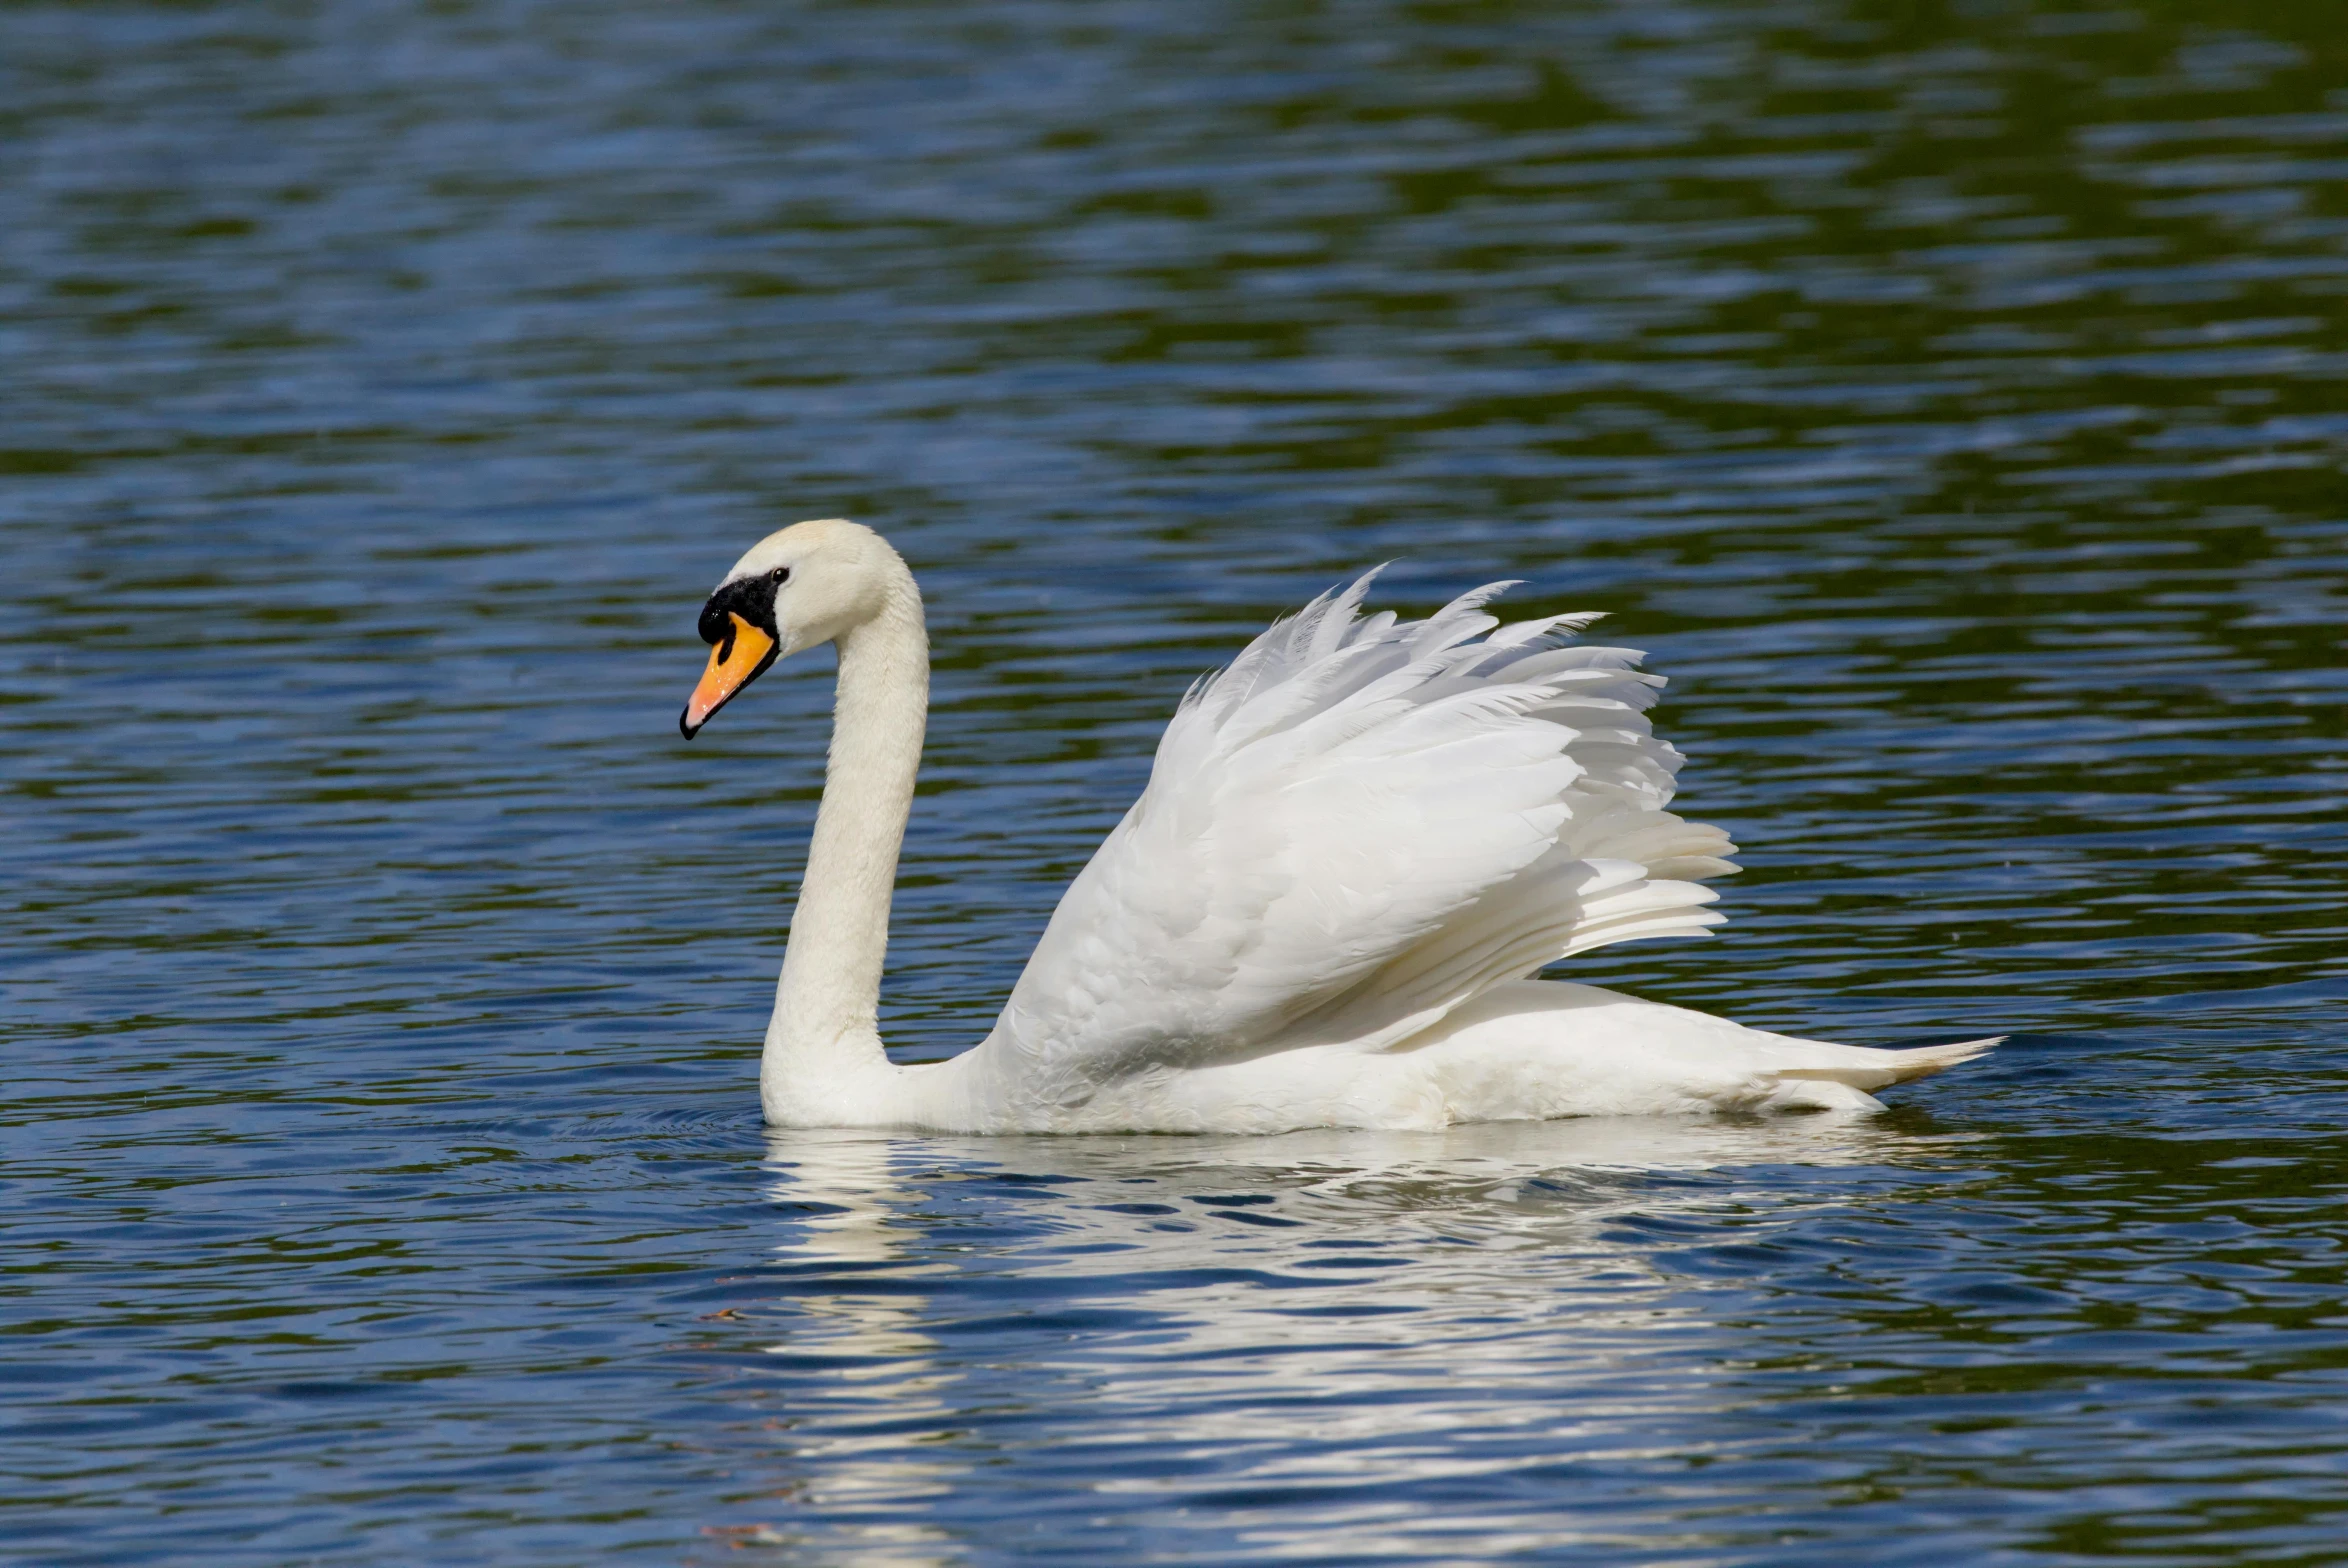 a white swan floating in the water near a body of water